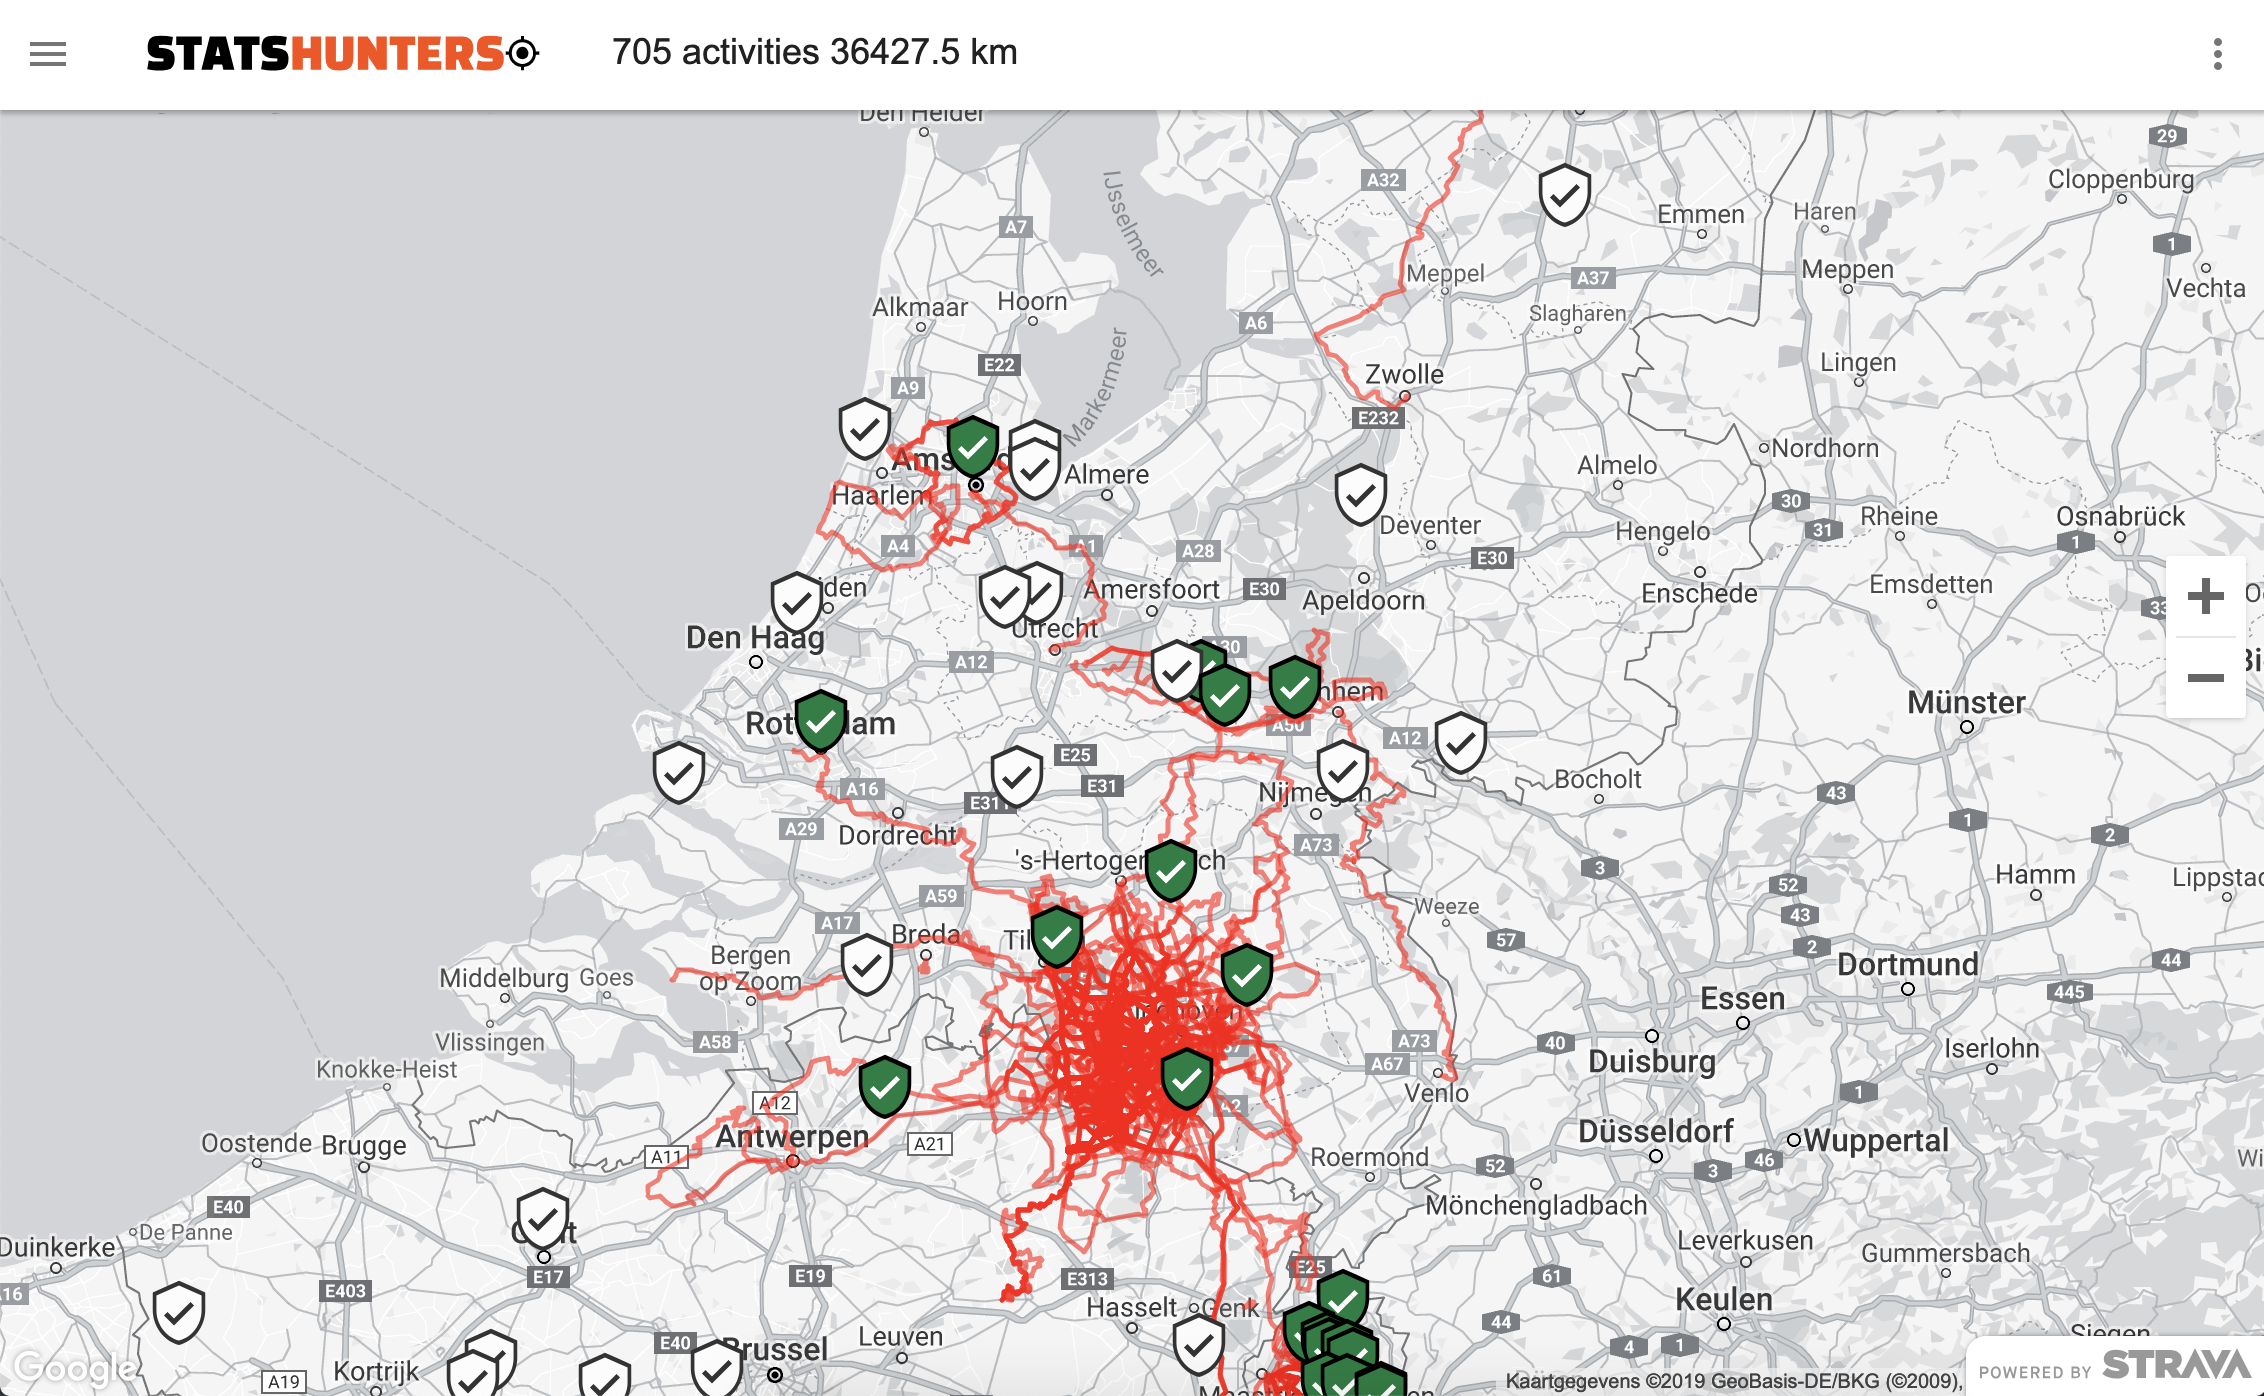 Get more out of your Strava activities with heatmap, statistics, badges and more...